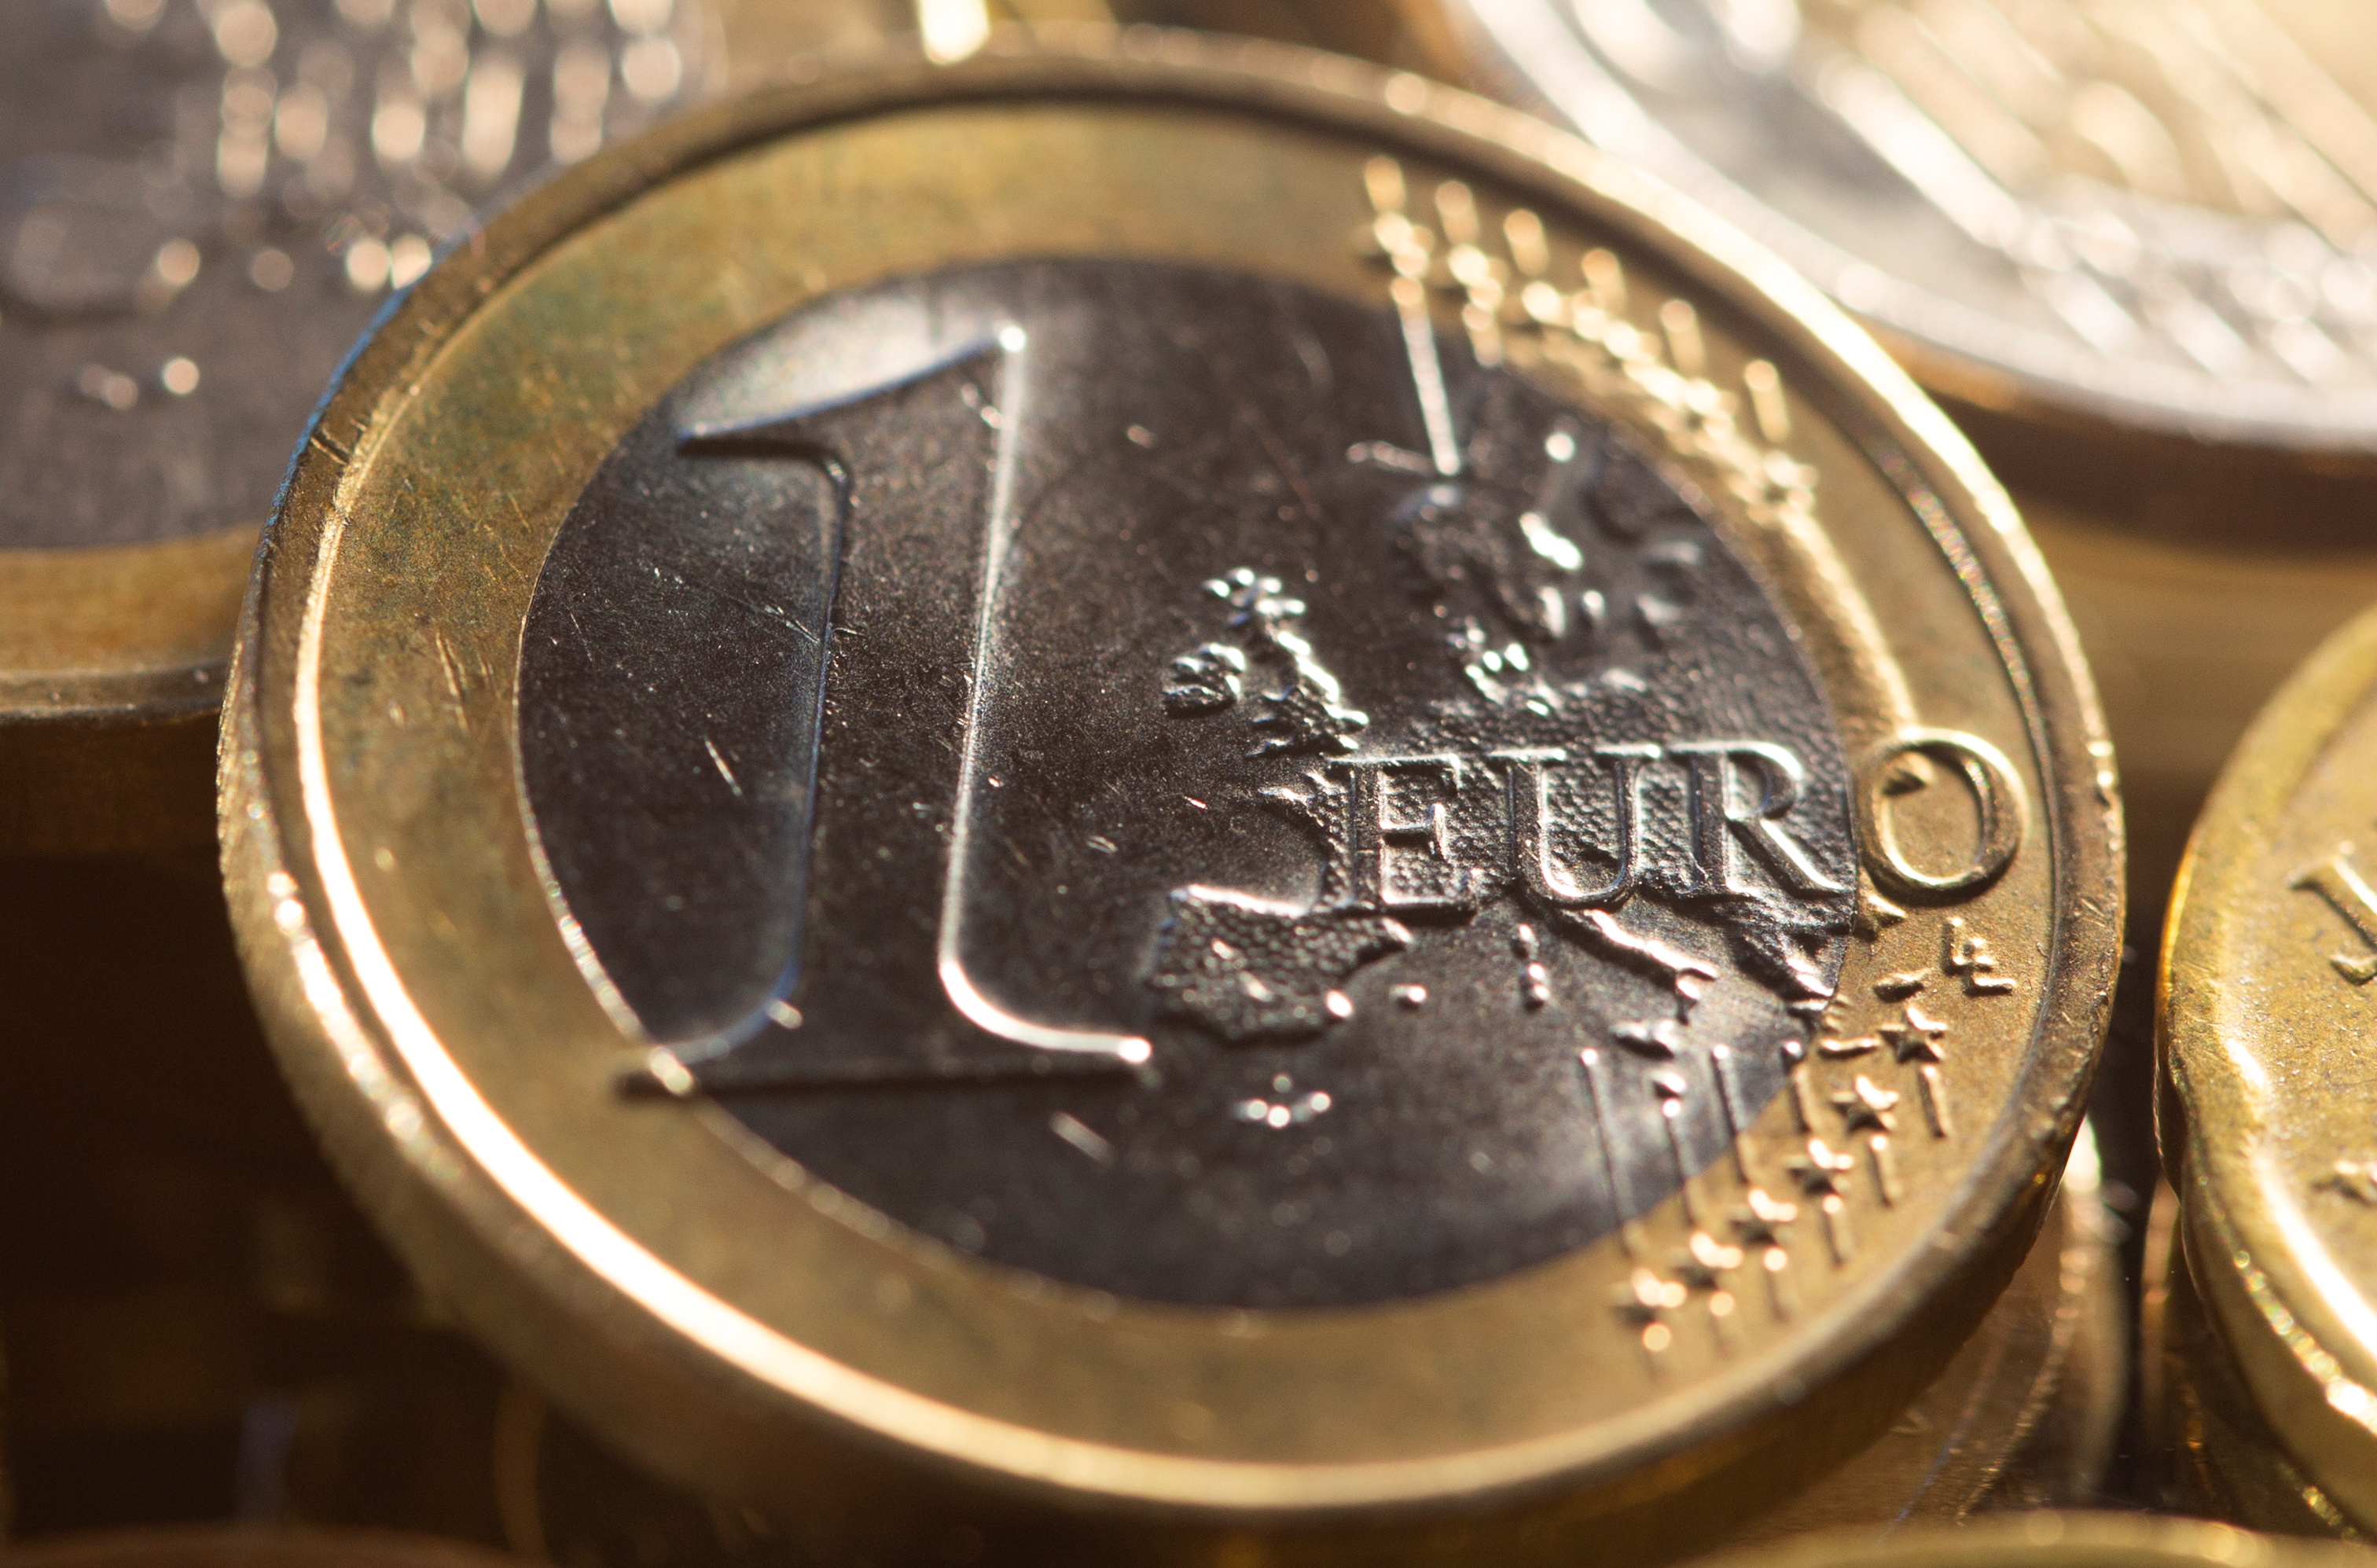 One Euro coins are seen in this illustration